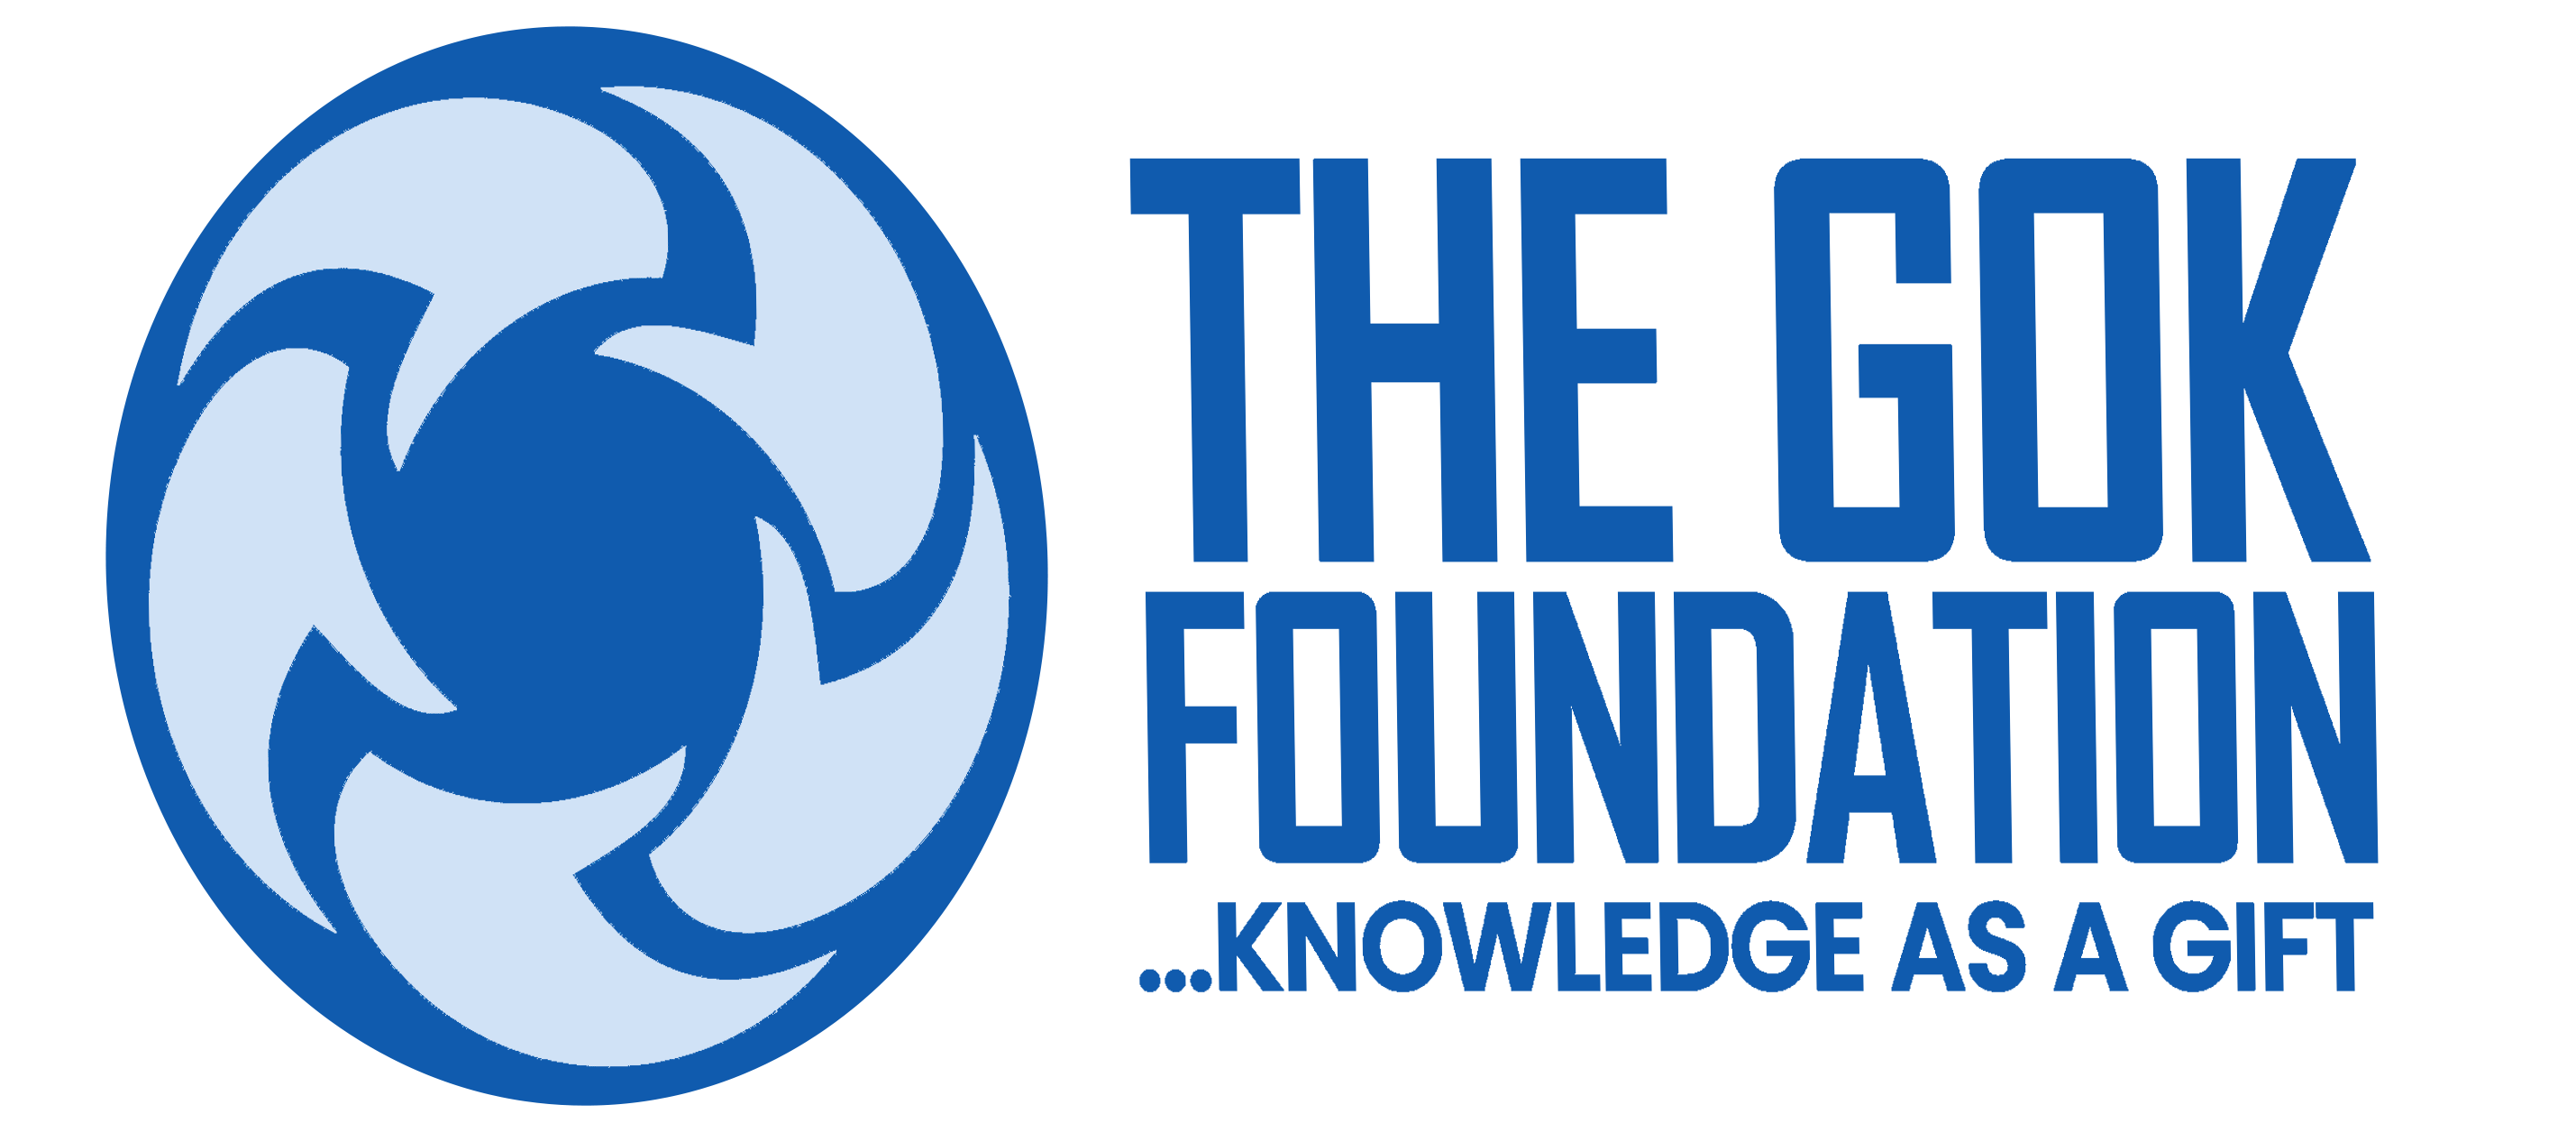 The Gift of Knowledge (GOK) Foundation Logo